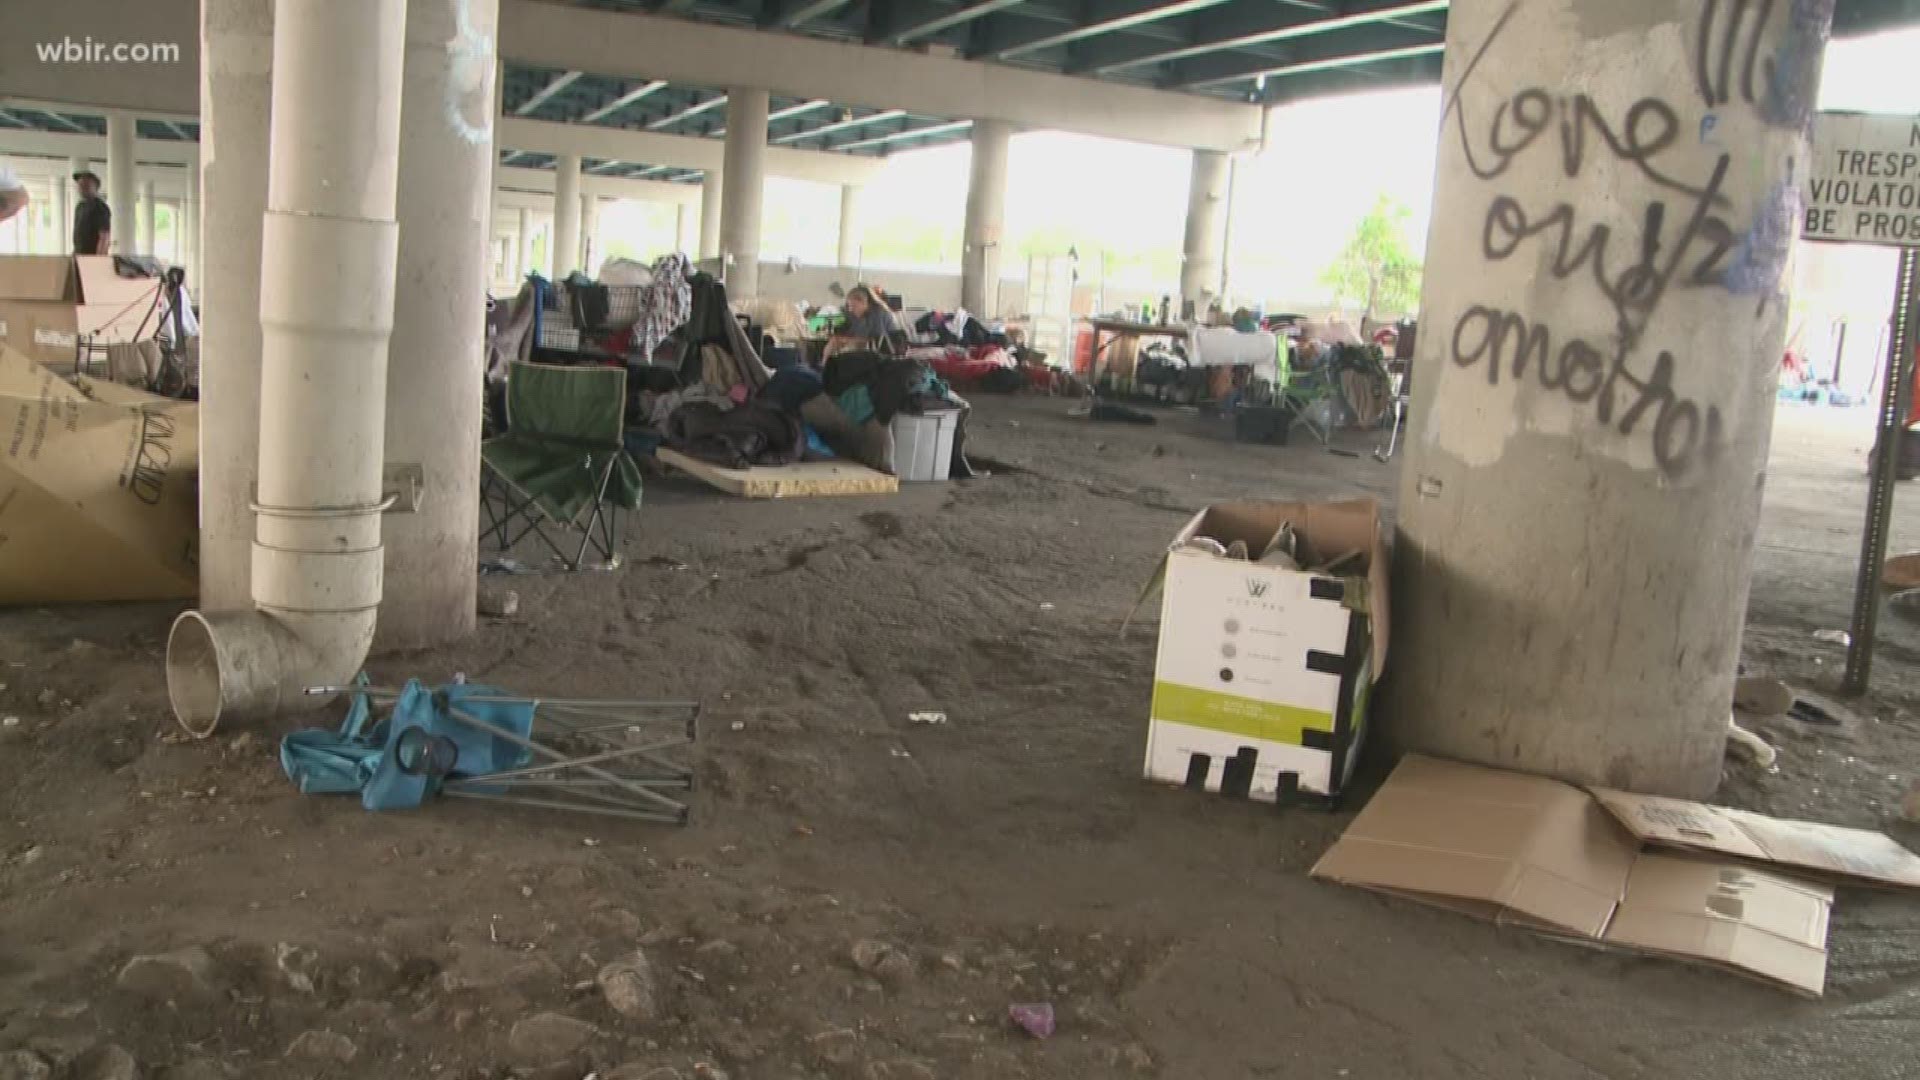 Tt's the area under the I-40 bridge on Broadway, where homeless people often gather on the sidewalks. The city plans to add picnic tables, port-a-potties, two full-time social workers and security.